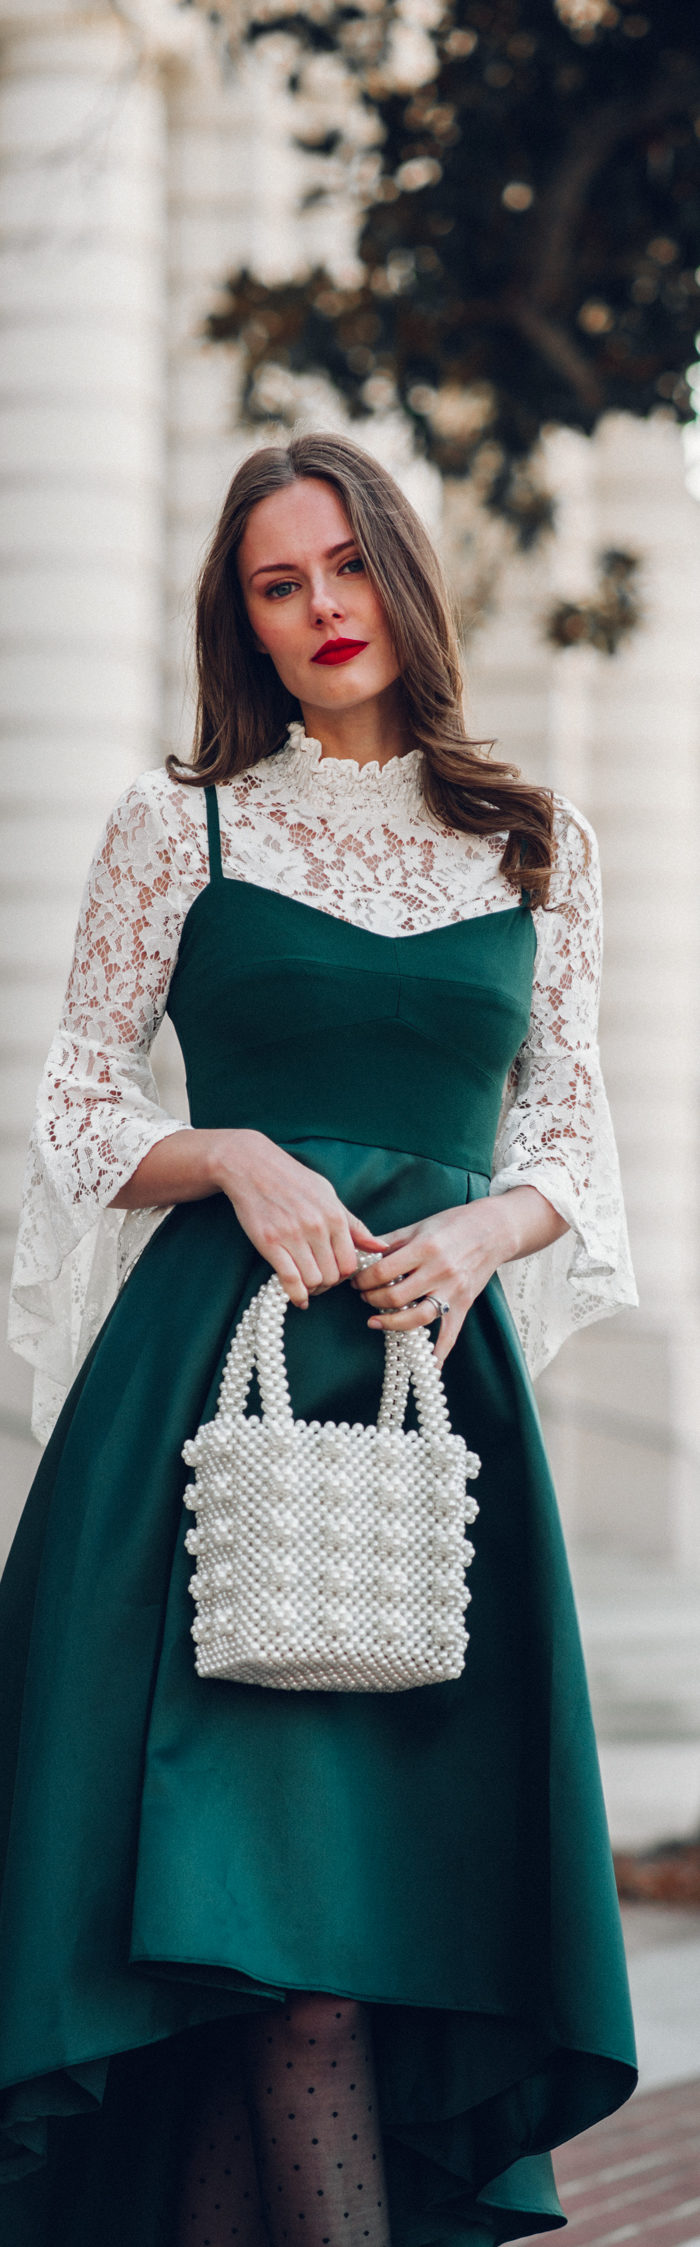 Alyssa Campanella of The A List blog shares her holiday looks wearing Hutch birdie dress